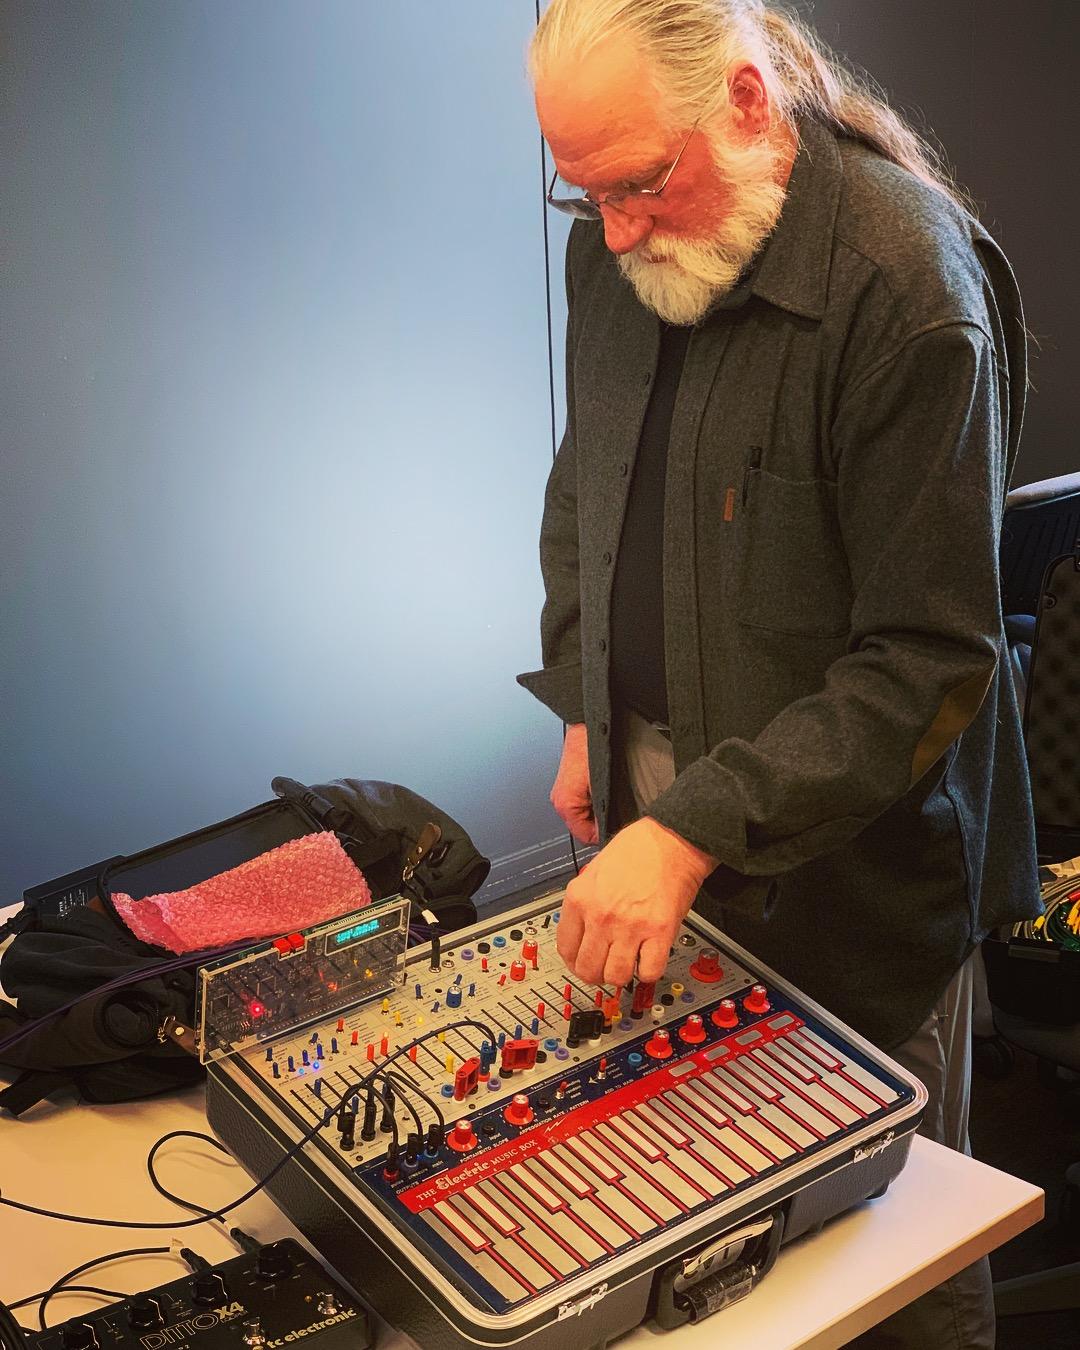 Todd Barton giving us a live demo of the Buchla Easel.  He was a wonderful mentor for this project.